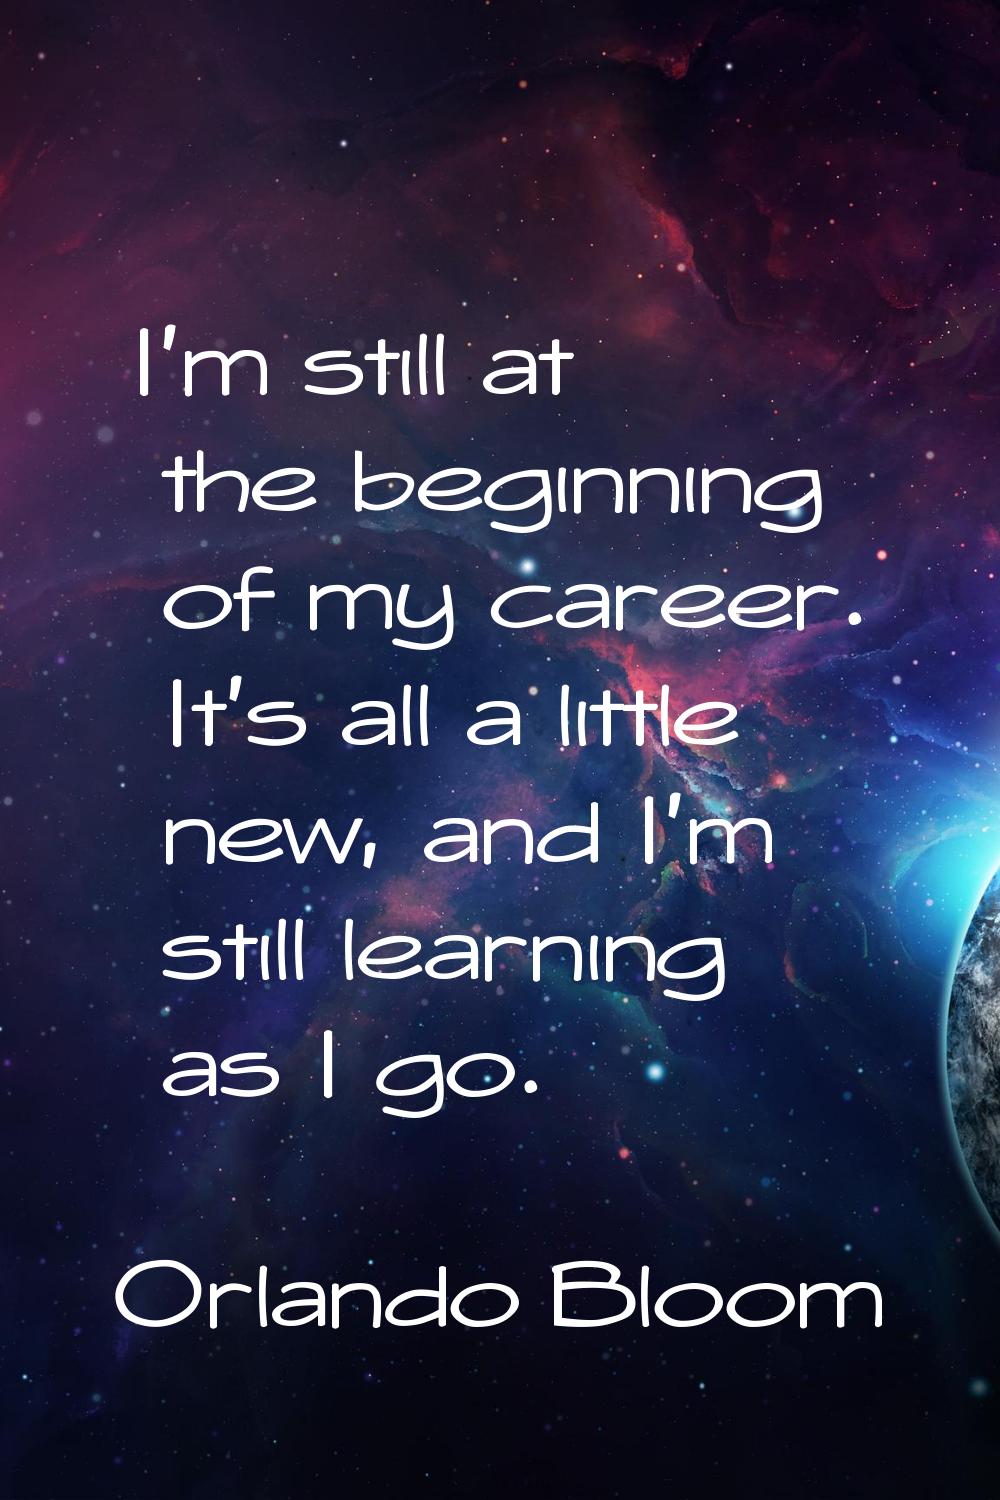 I'm still at the beginning of my career. It's all a little new, and I'm still learning as I go.